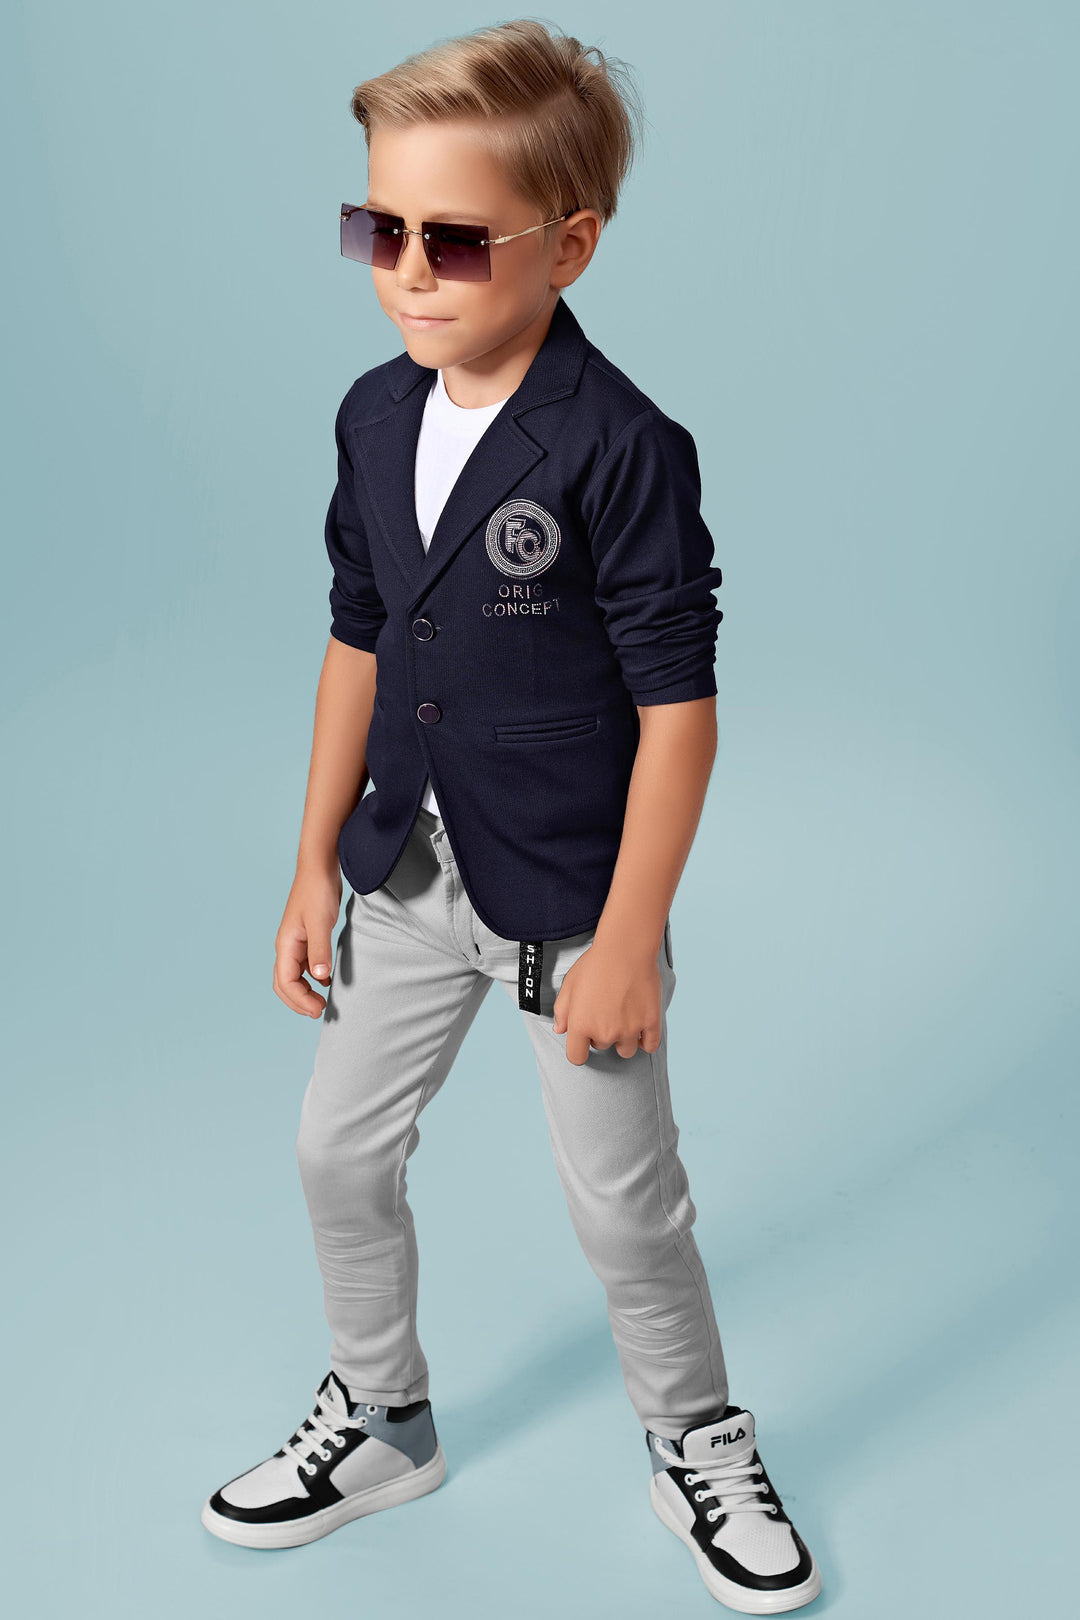 White and Grey with Navy Blue Waist Coat and Set for Boys with Belt - Seasons Chennai